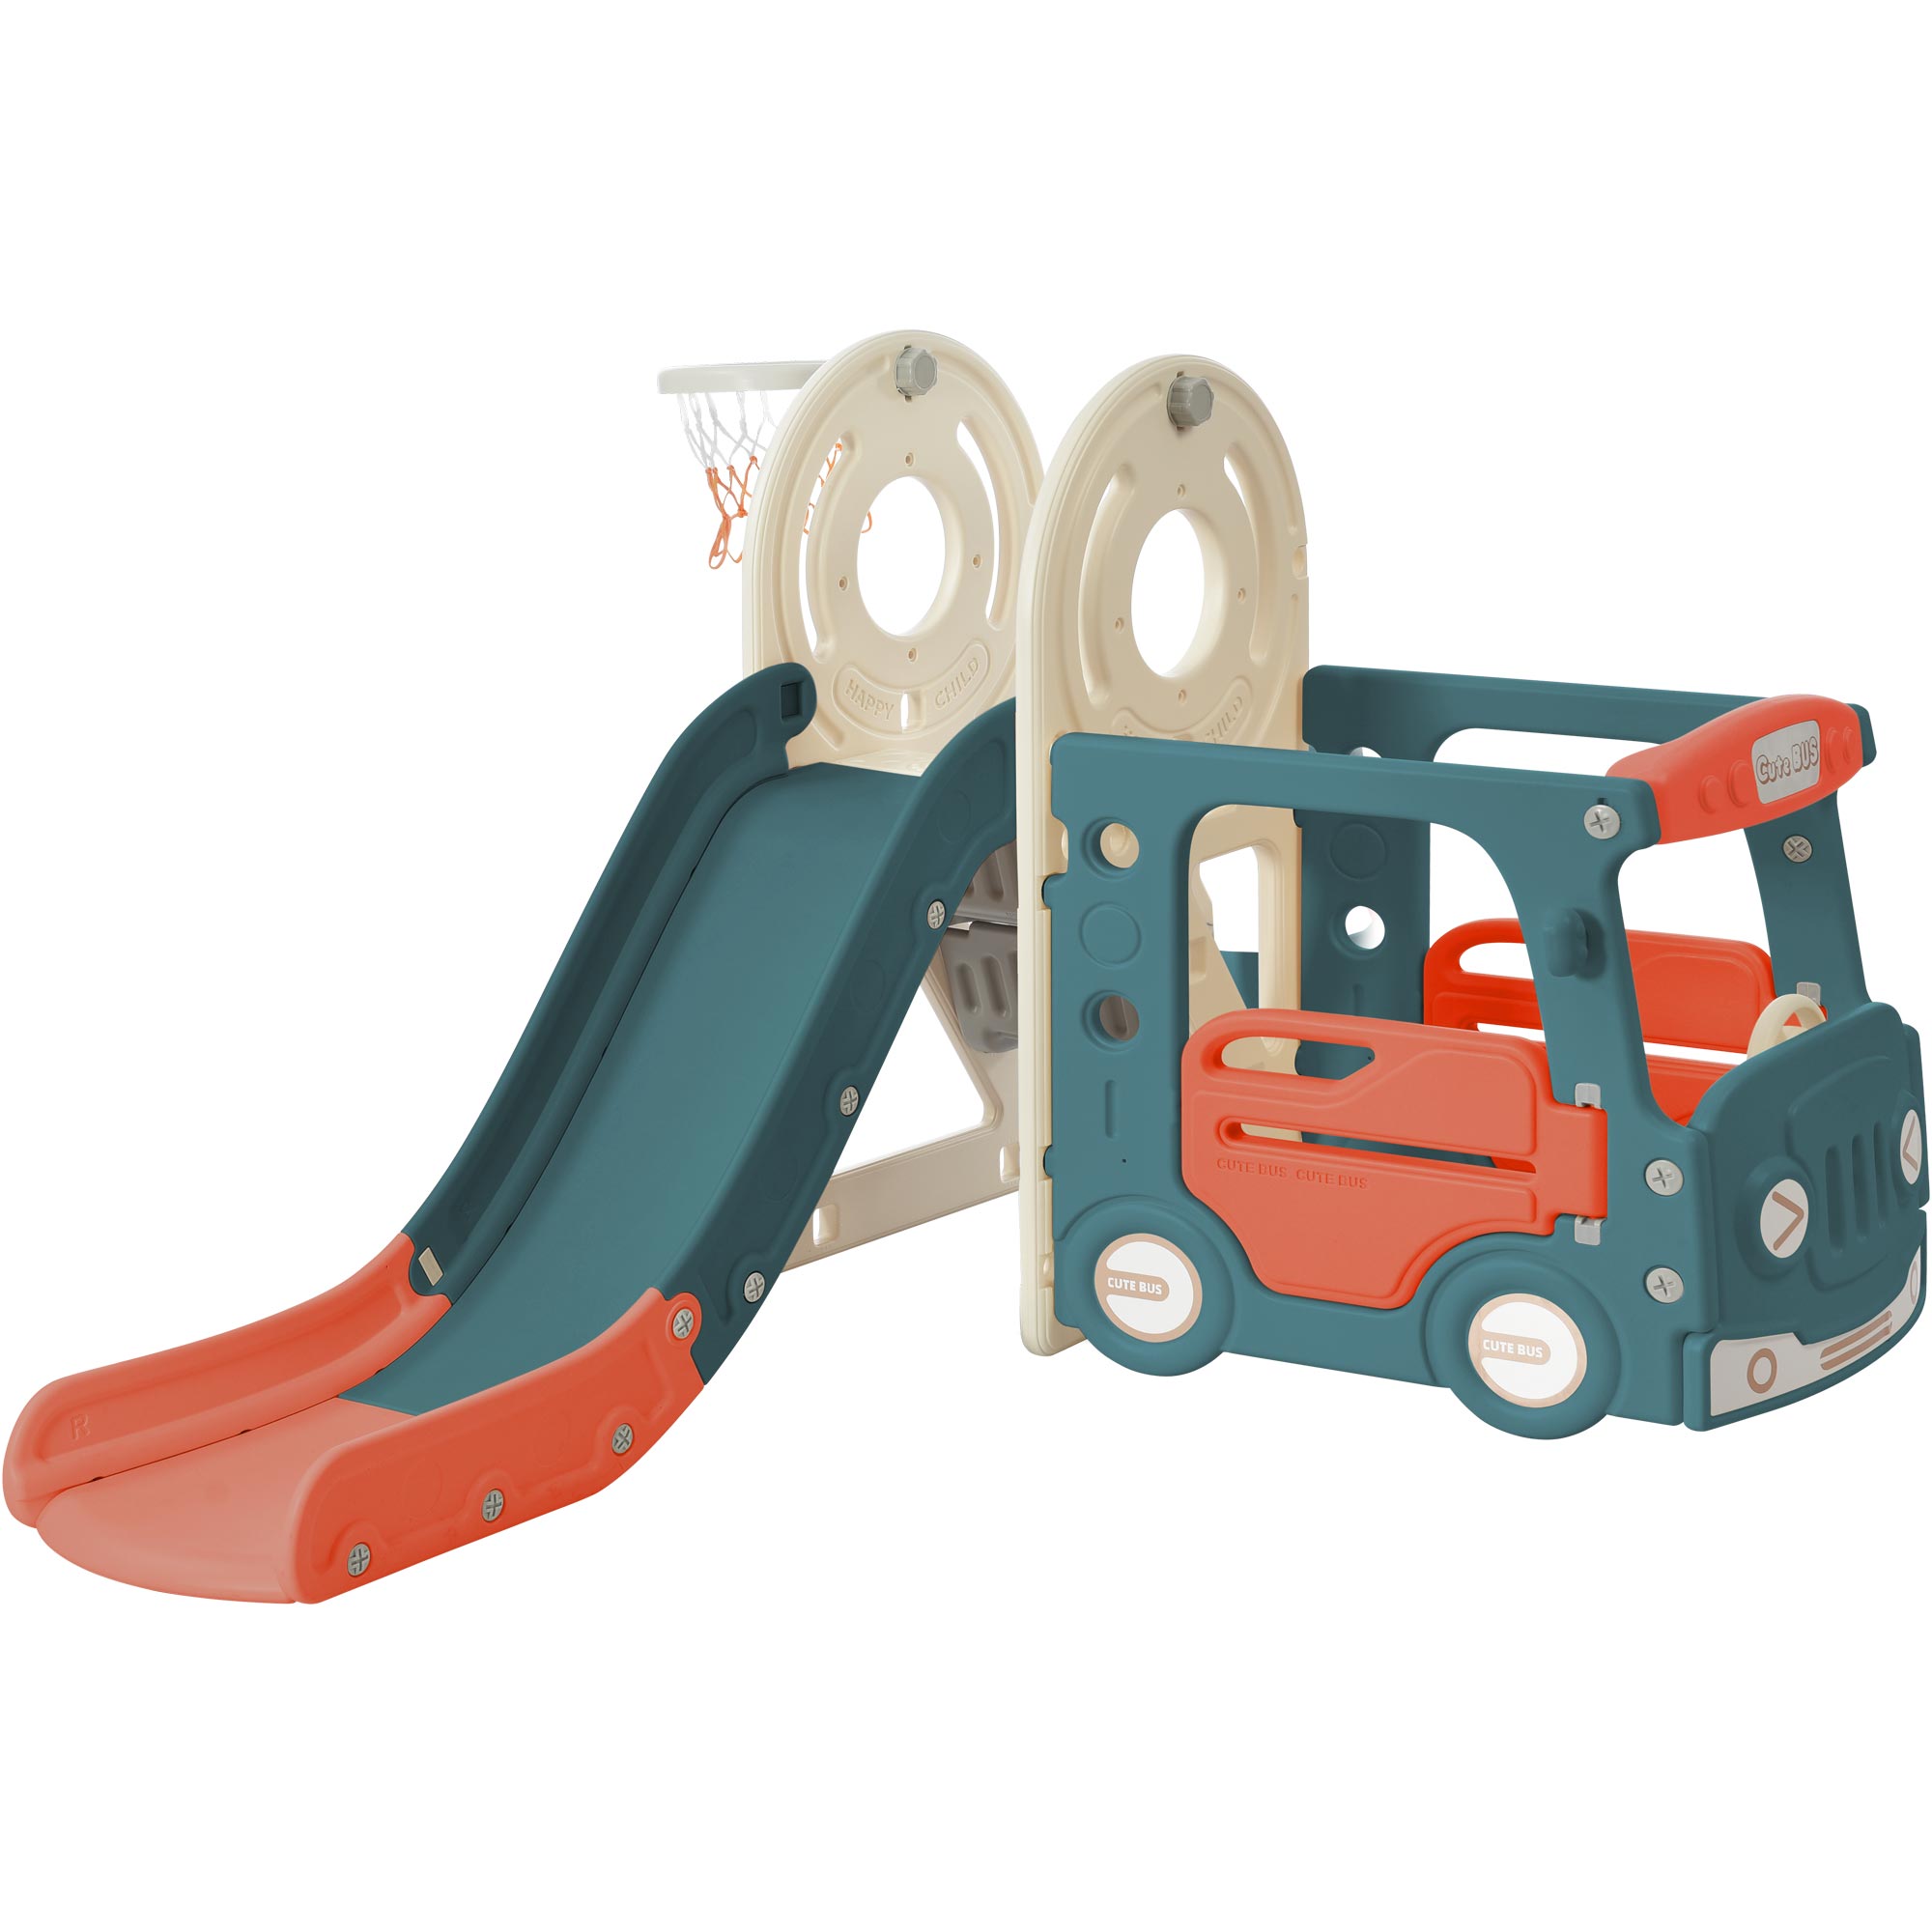 Slide With Bus Play Structure